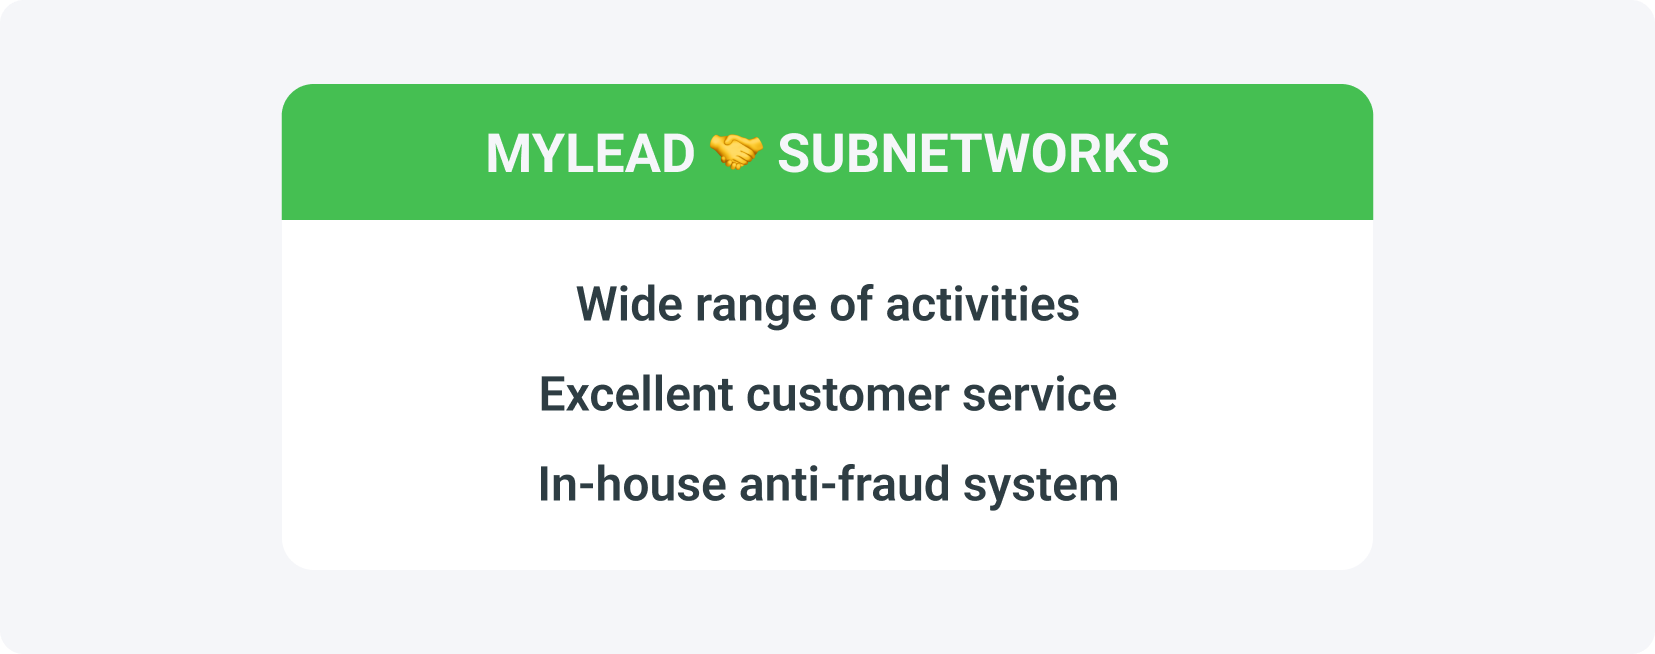 The advantages of cooperation between subnetworks with an affiliate network such as MyLead are a wide range of activities, excellent customer service and an internal anti-fraud system.